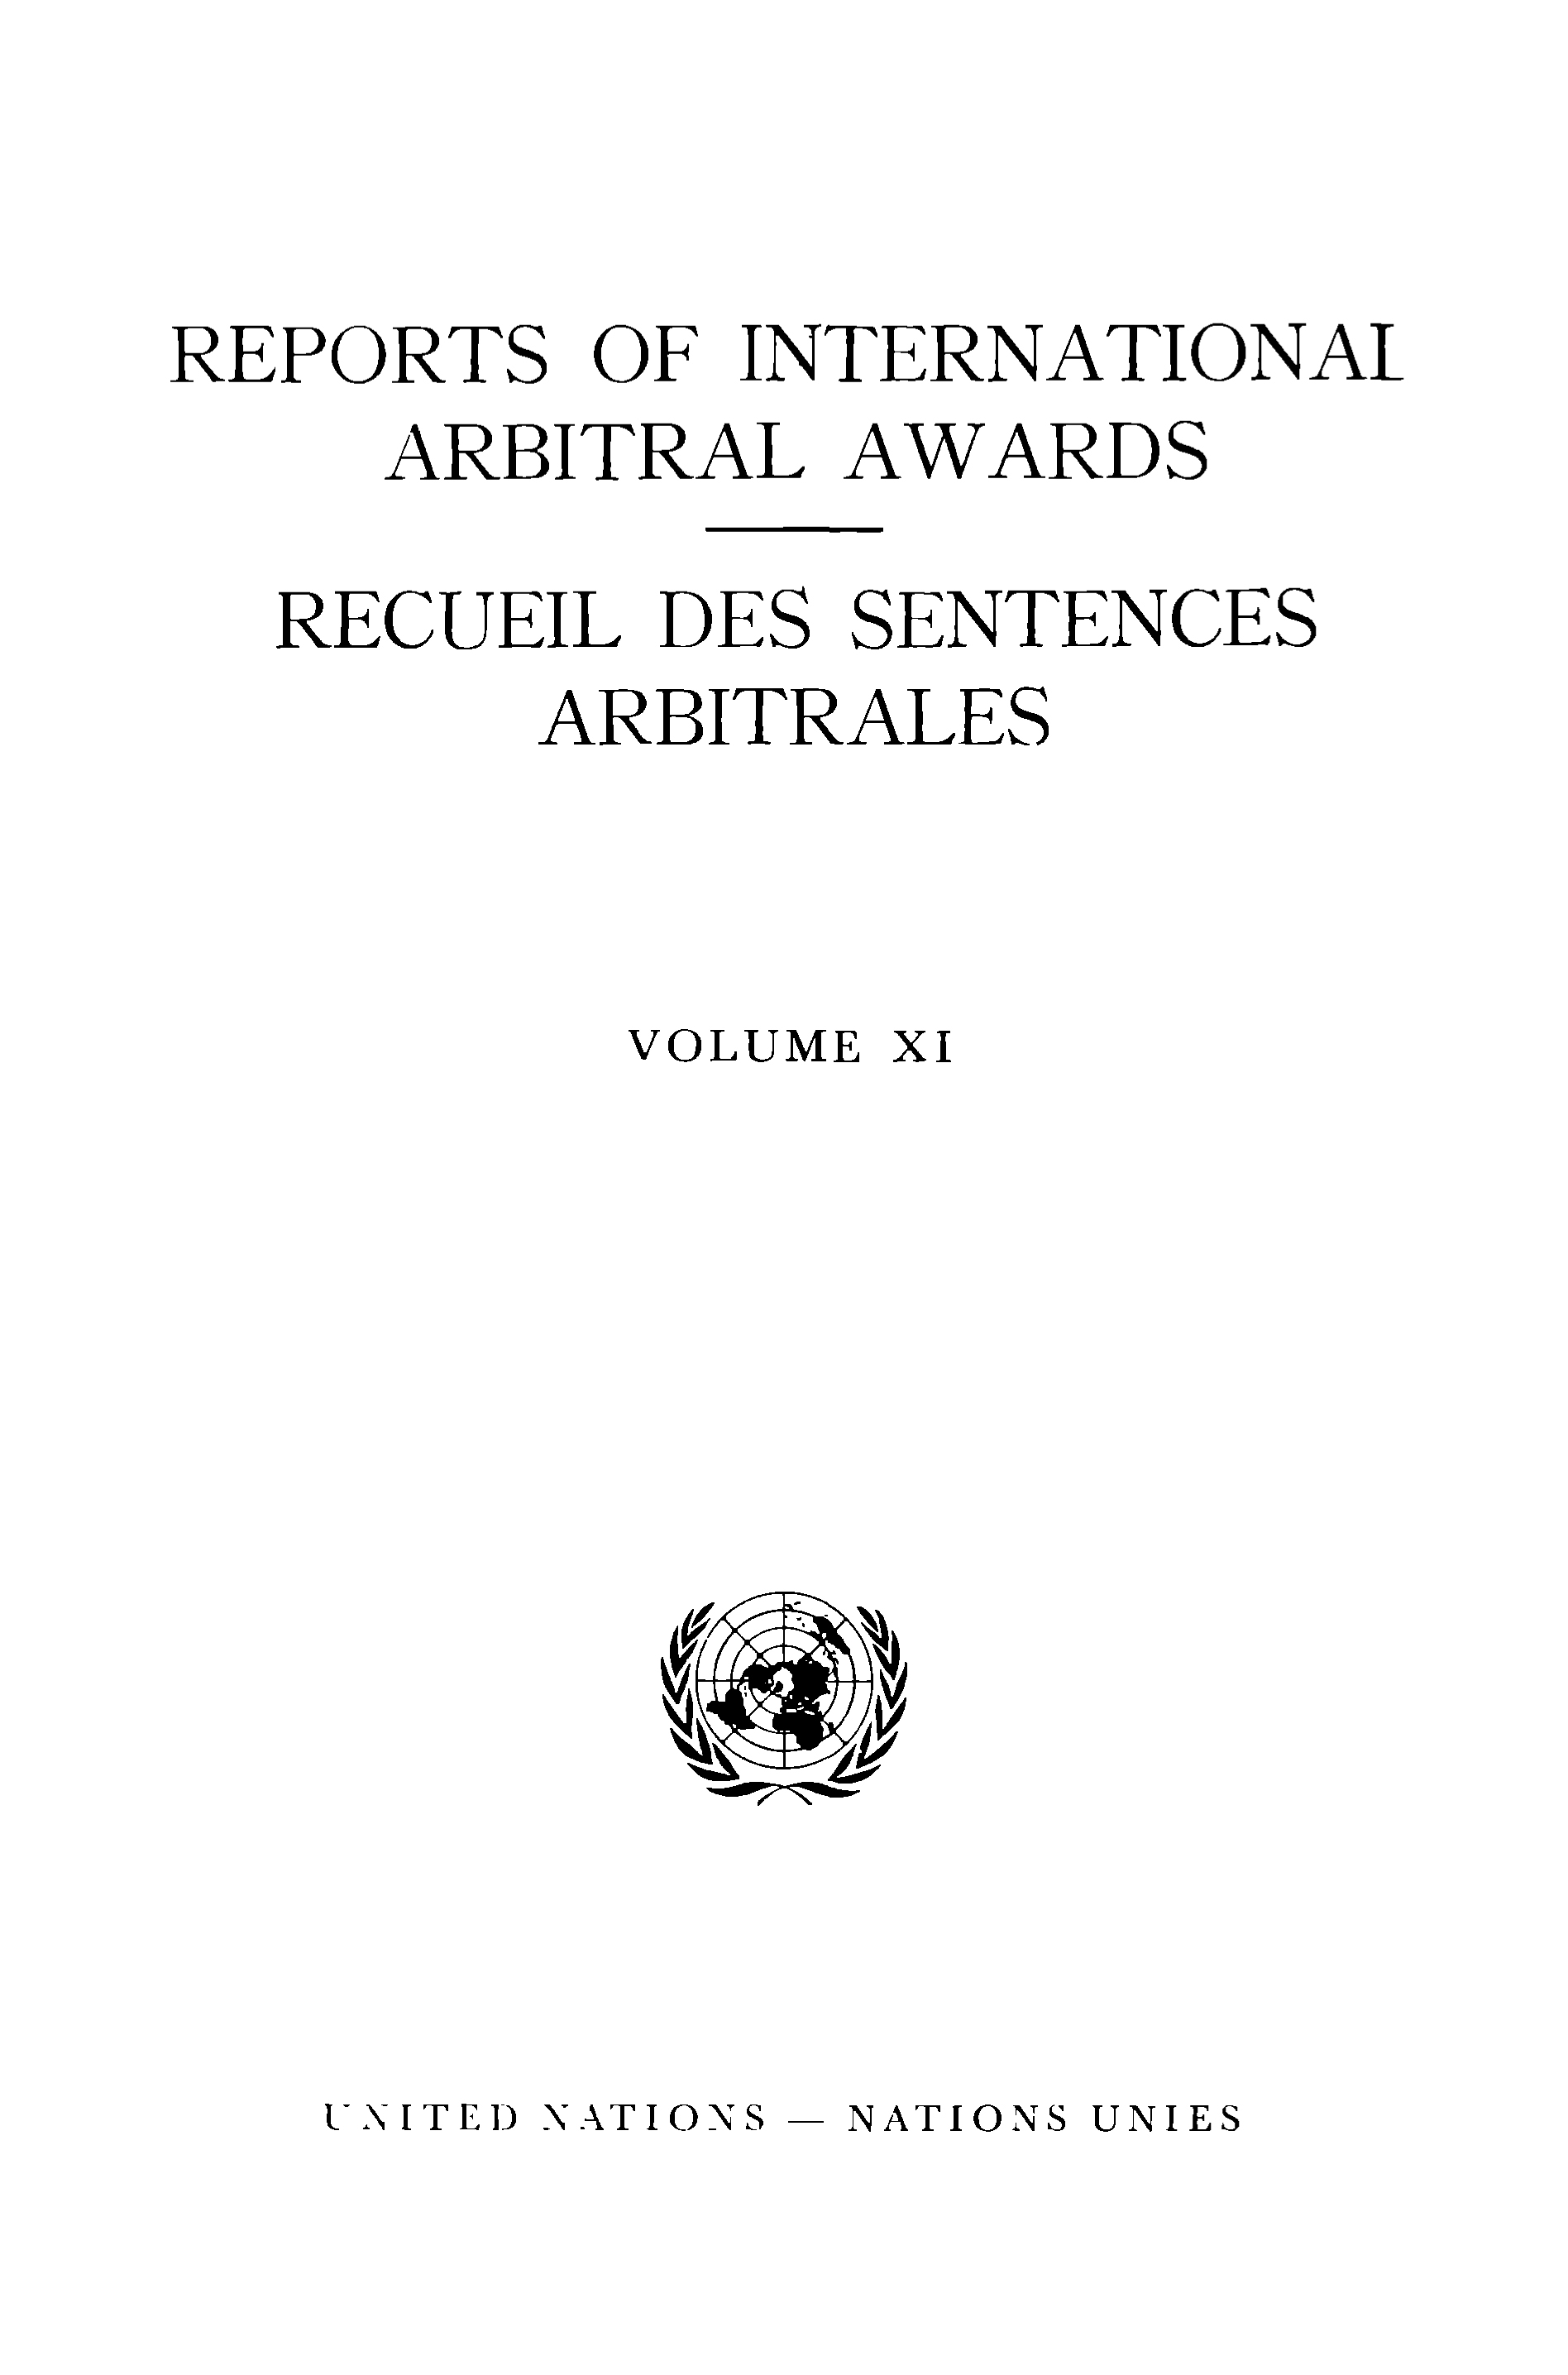 image of Reports of International Arbitral Awards, Vol. XI